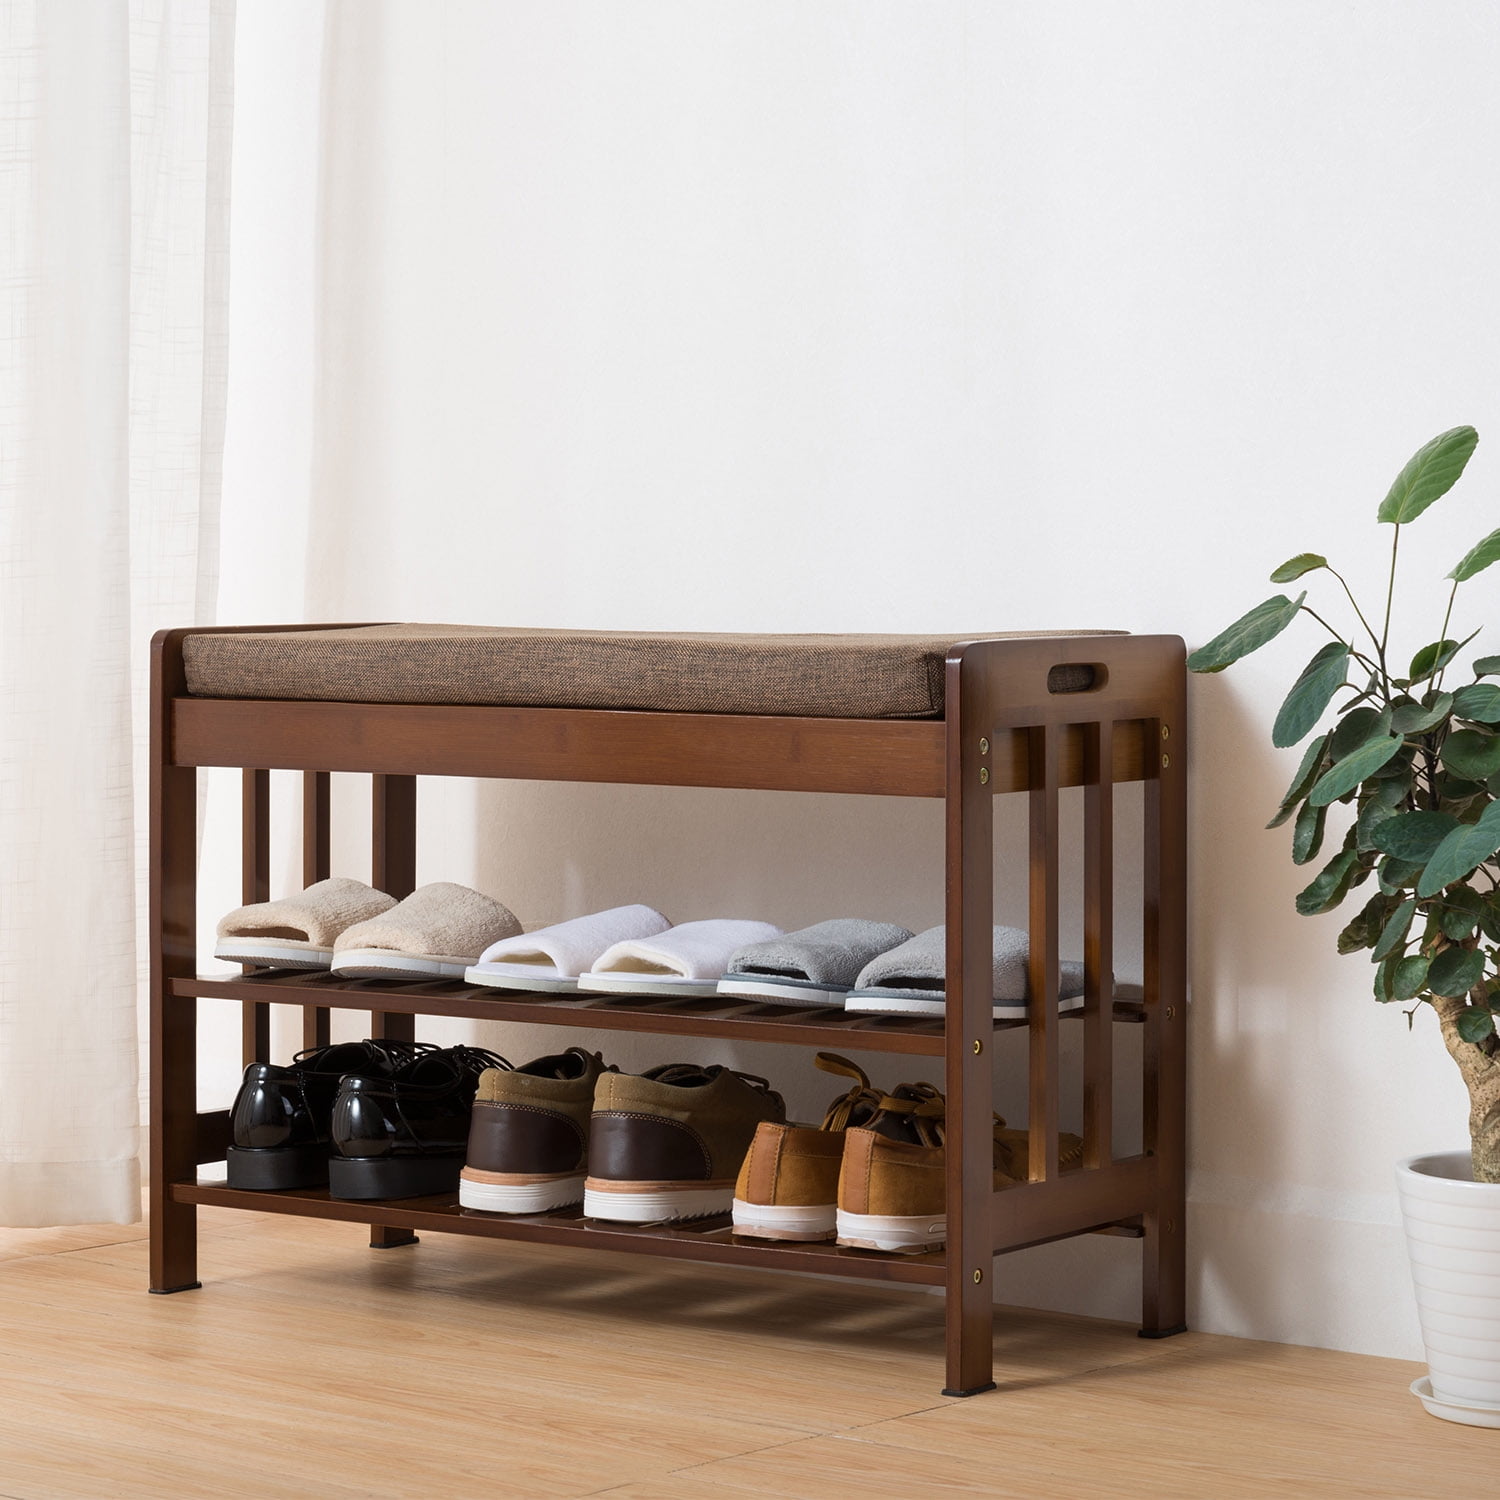 SortWise™ 2 Tier Natural Bamboo Shoe Rack Footstool Bench Entryway Shoes Storage Shelf Organizer with A Larger Boots Heels Section 34 1/4 L x 11 1/8 W x 17 3/4 H Natural